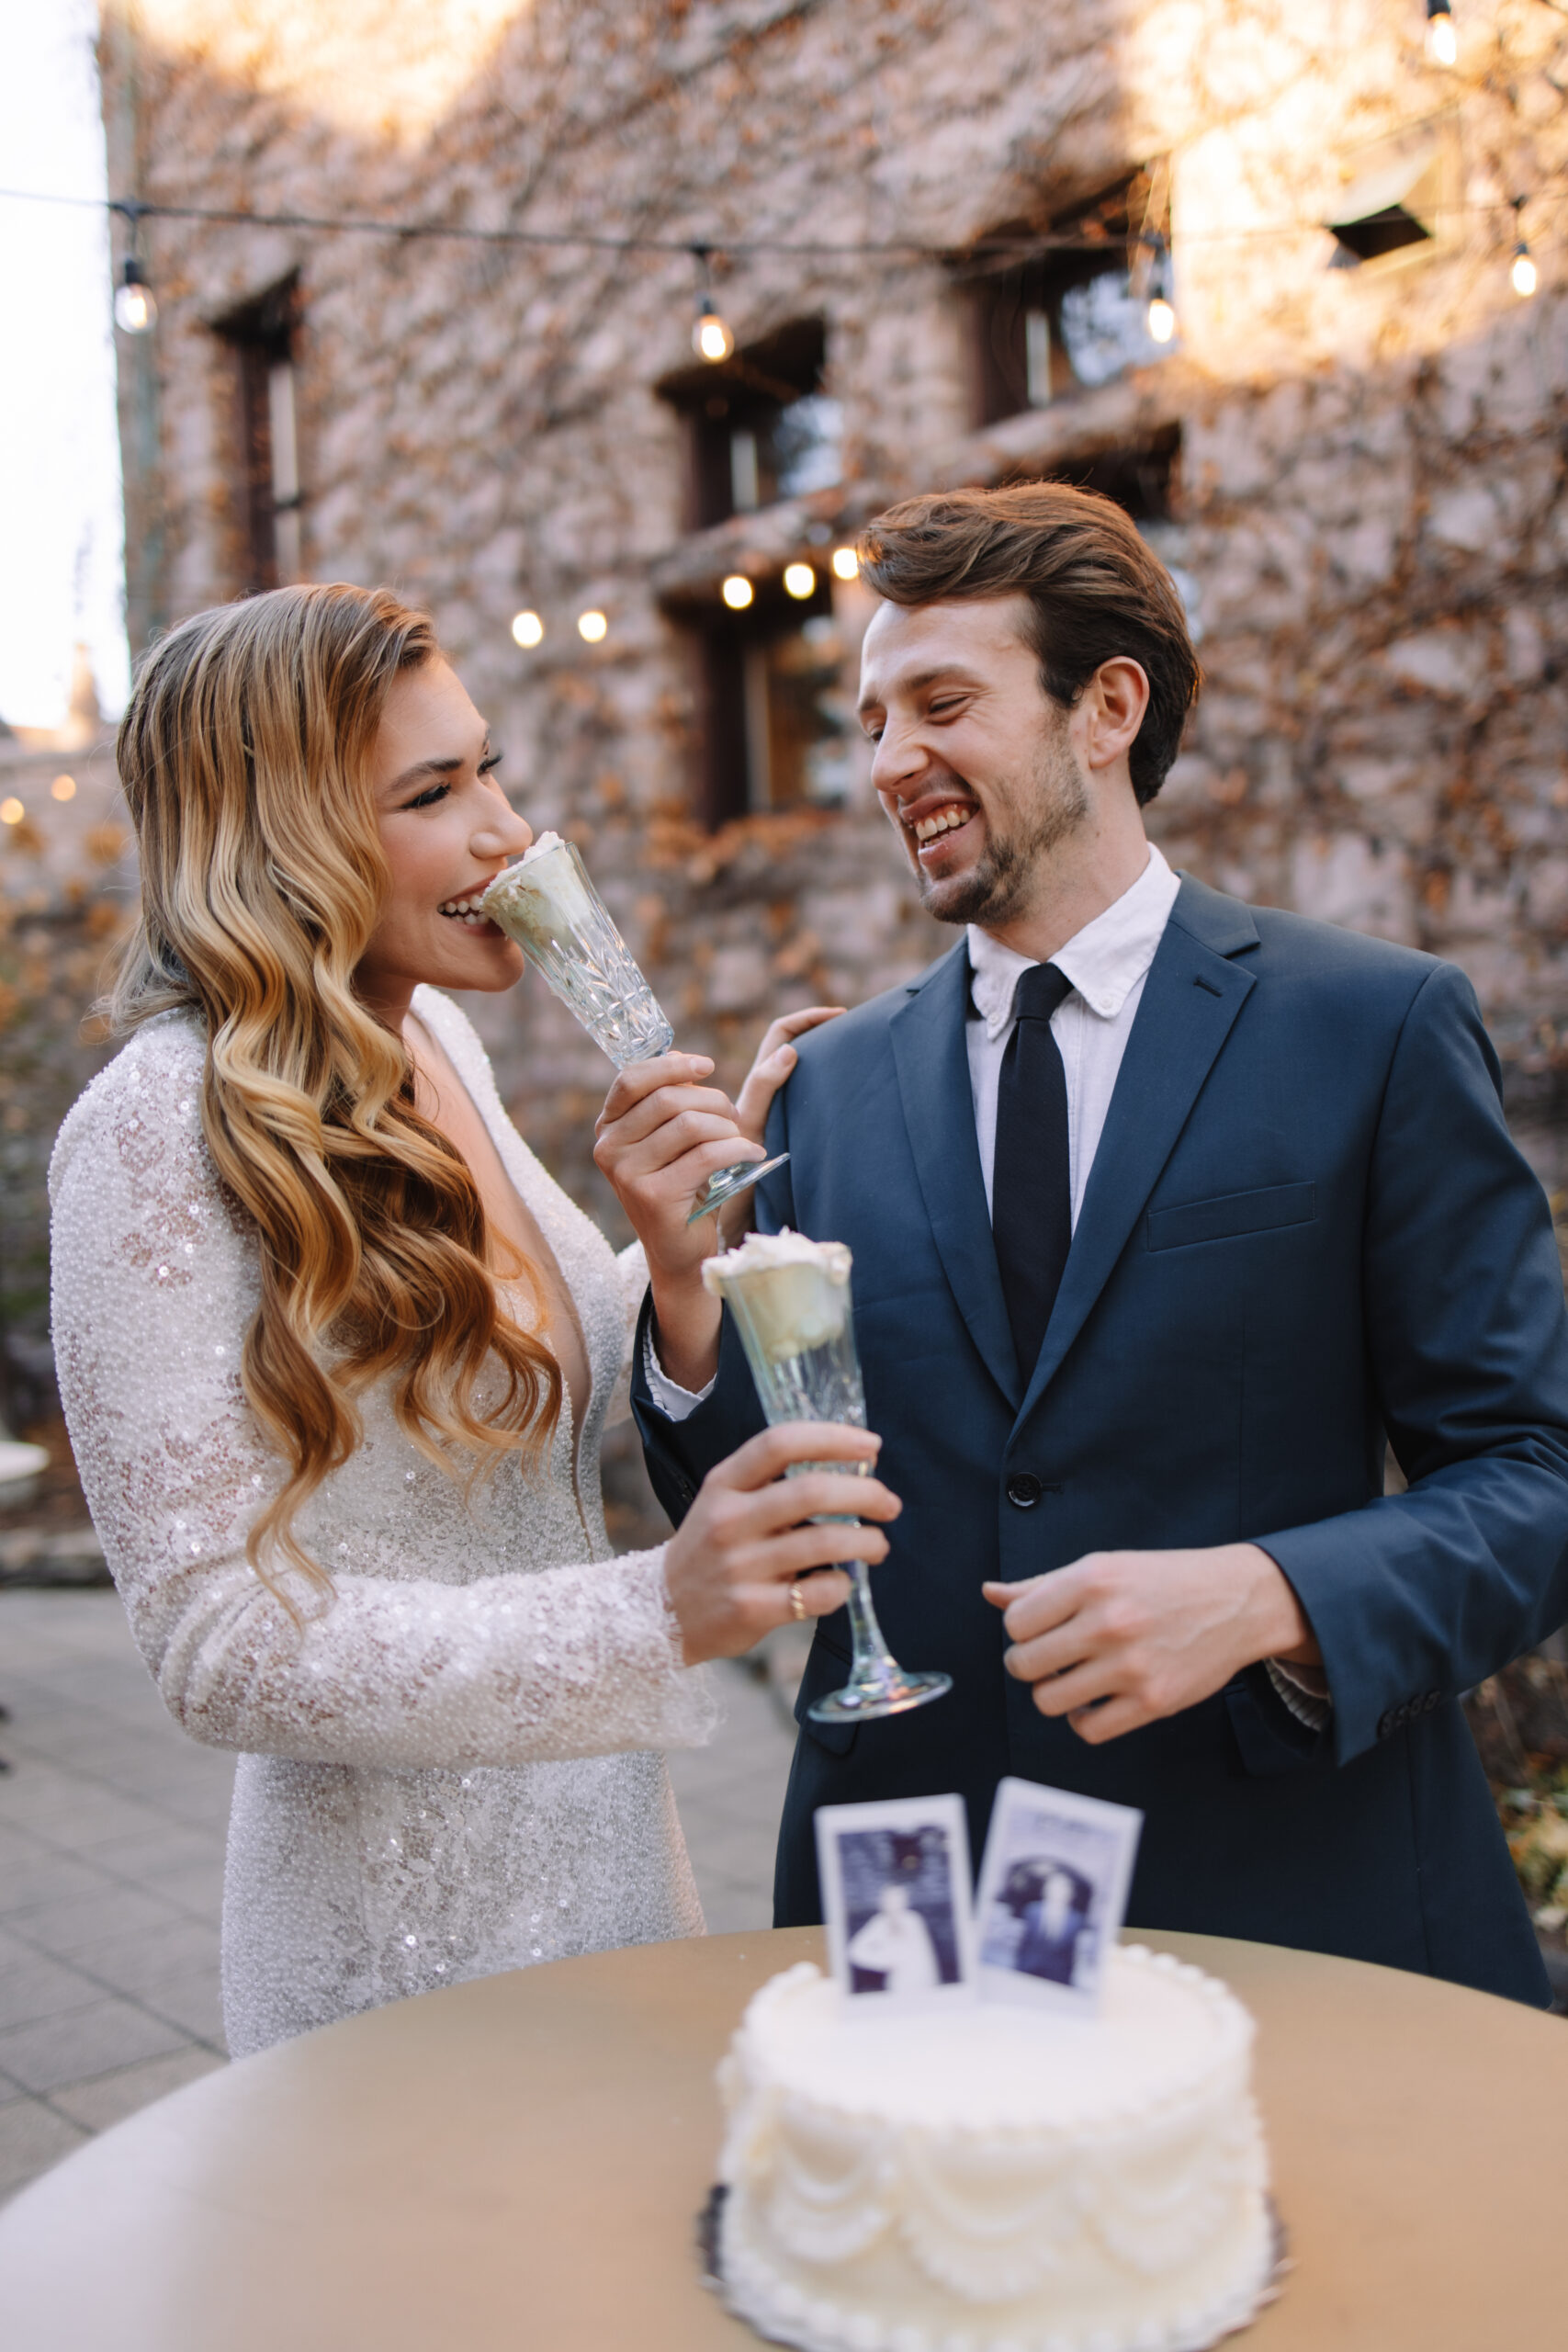 A bride and groom laugh and clink champagne glasses at an outdoor wedding reception, with a small cake and photos on the table in front of them. Her dress from a wedding dress shop in minneapolis 